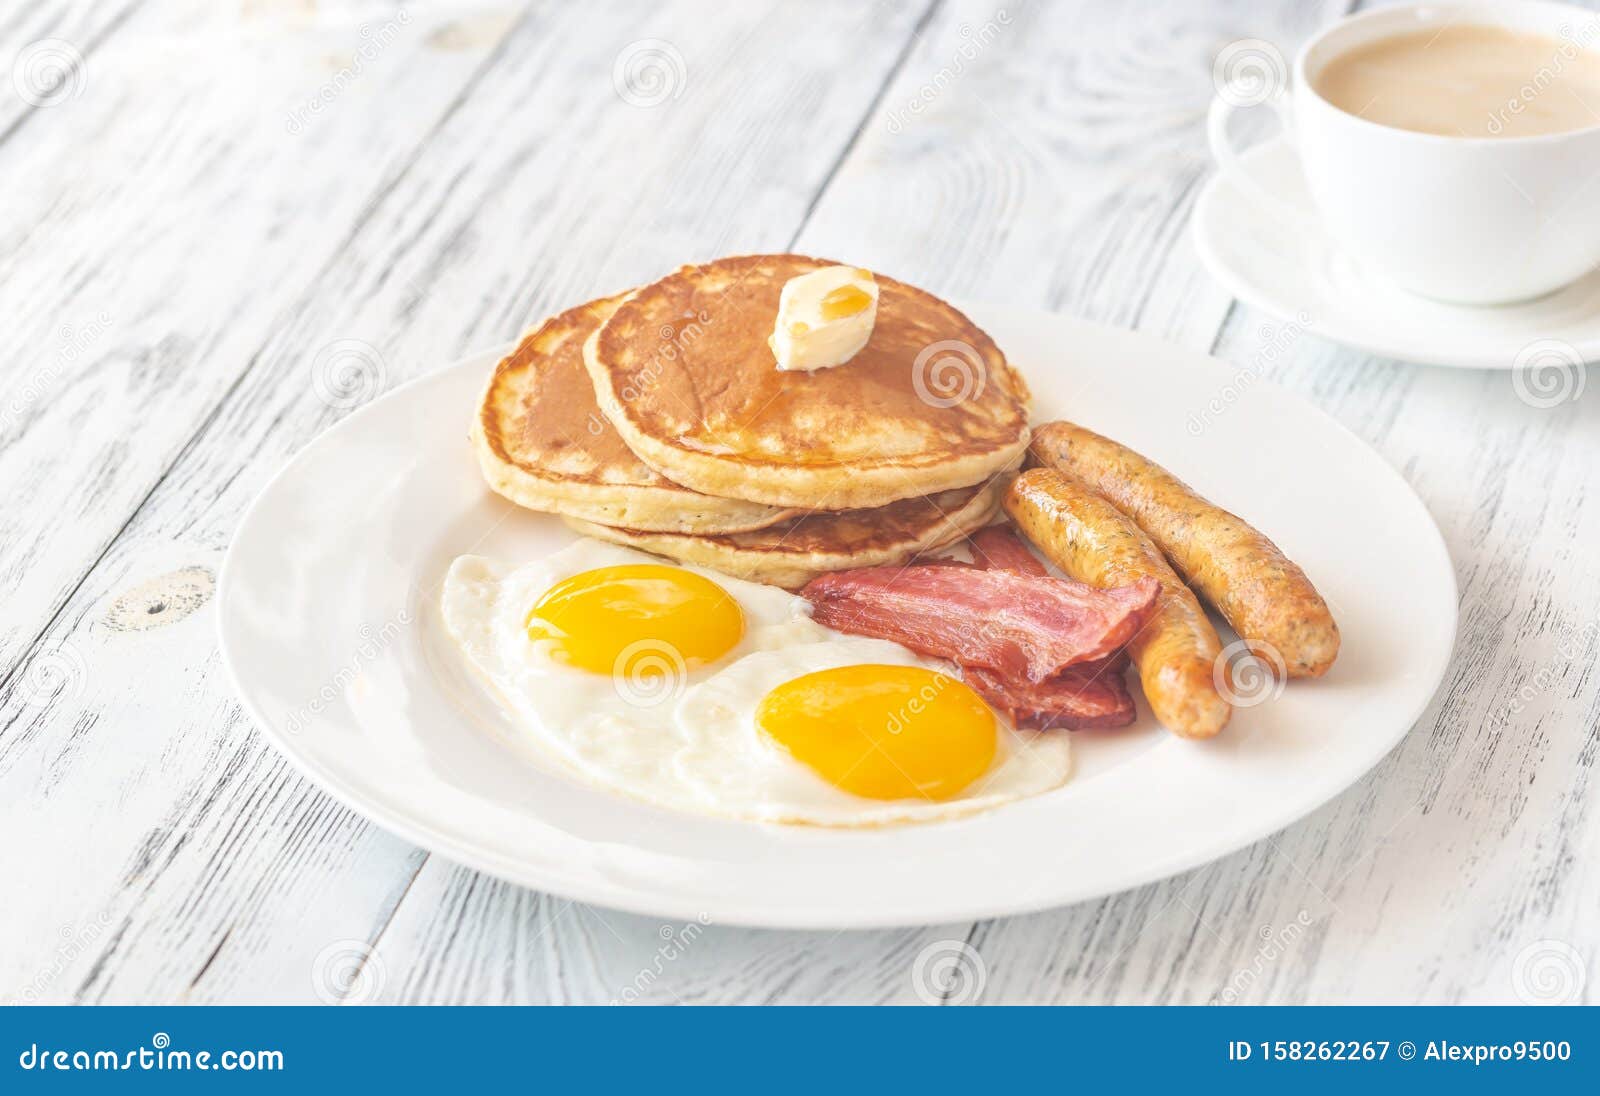 Portion of American Breakfast Stock Image - Image of pancake, fried ...